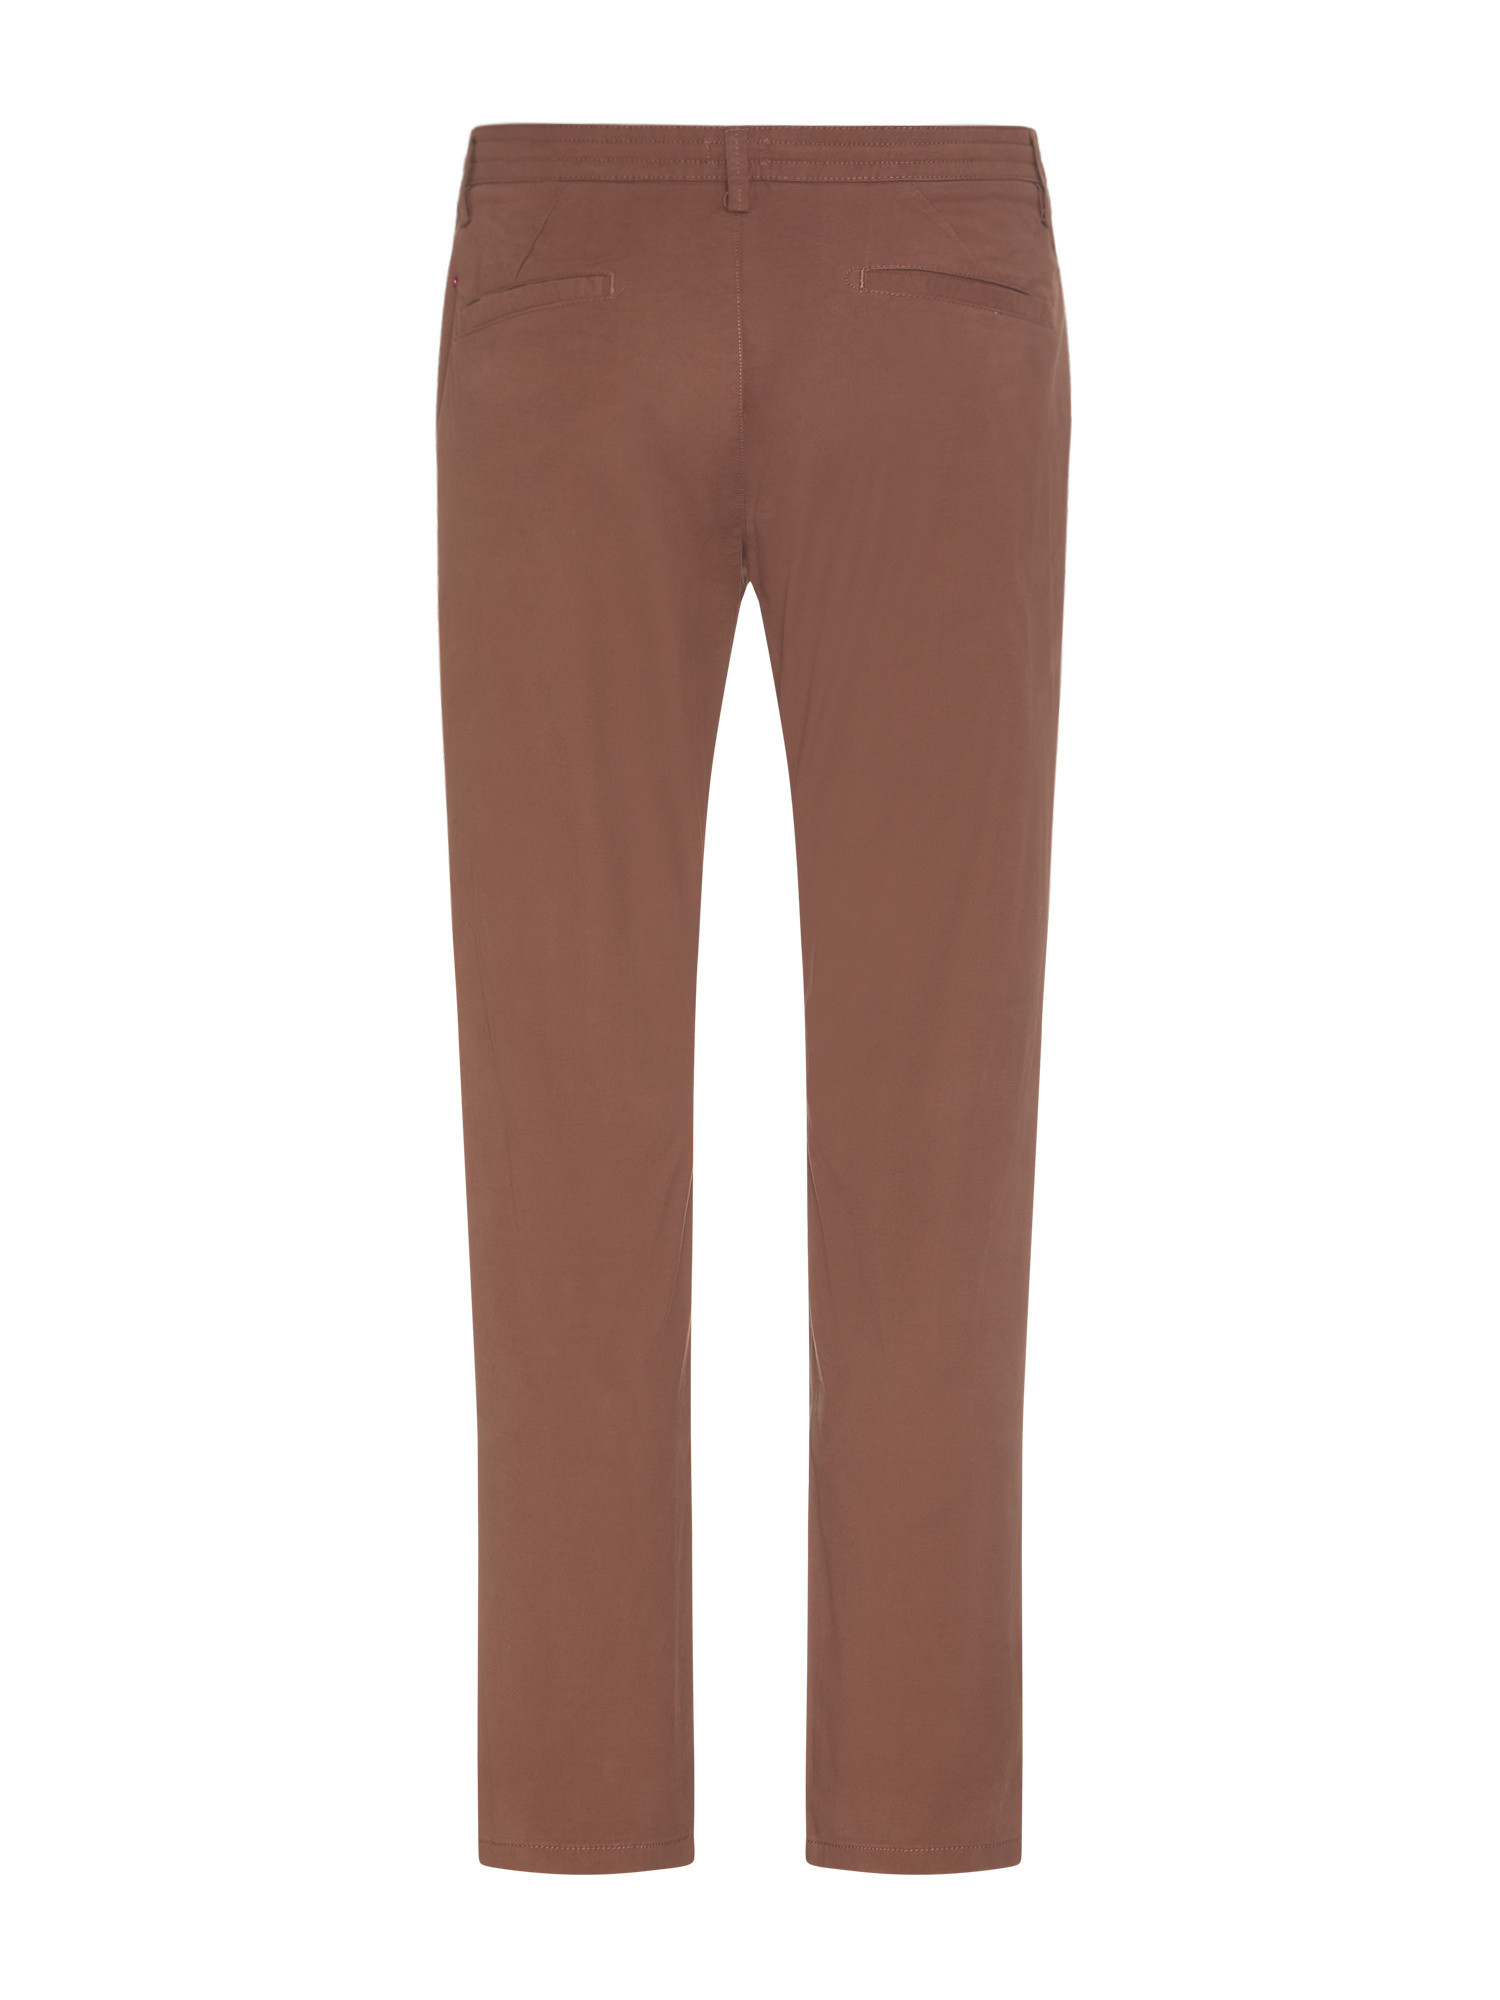 JCT - Jogger chino slim fit, Marrone, large image number 1